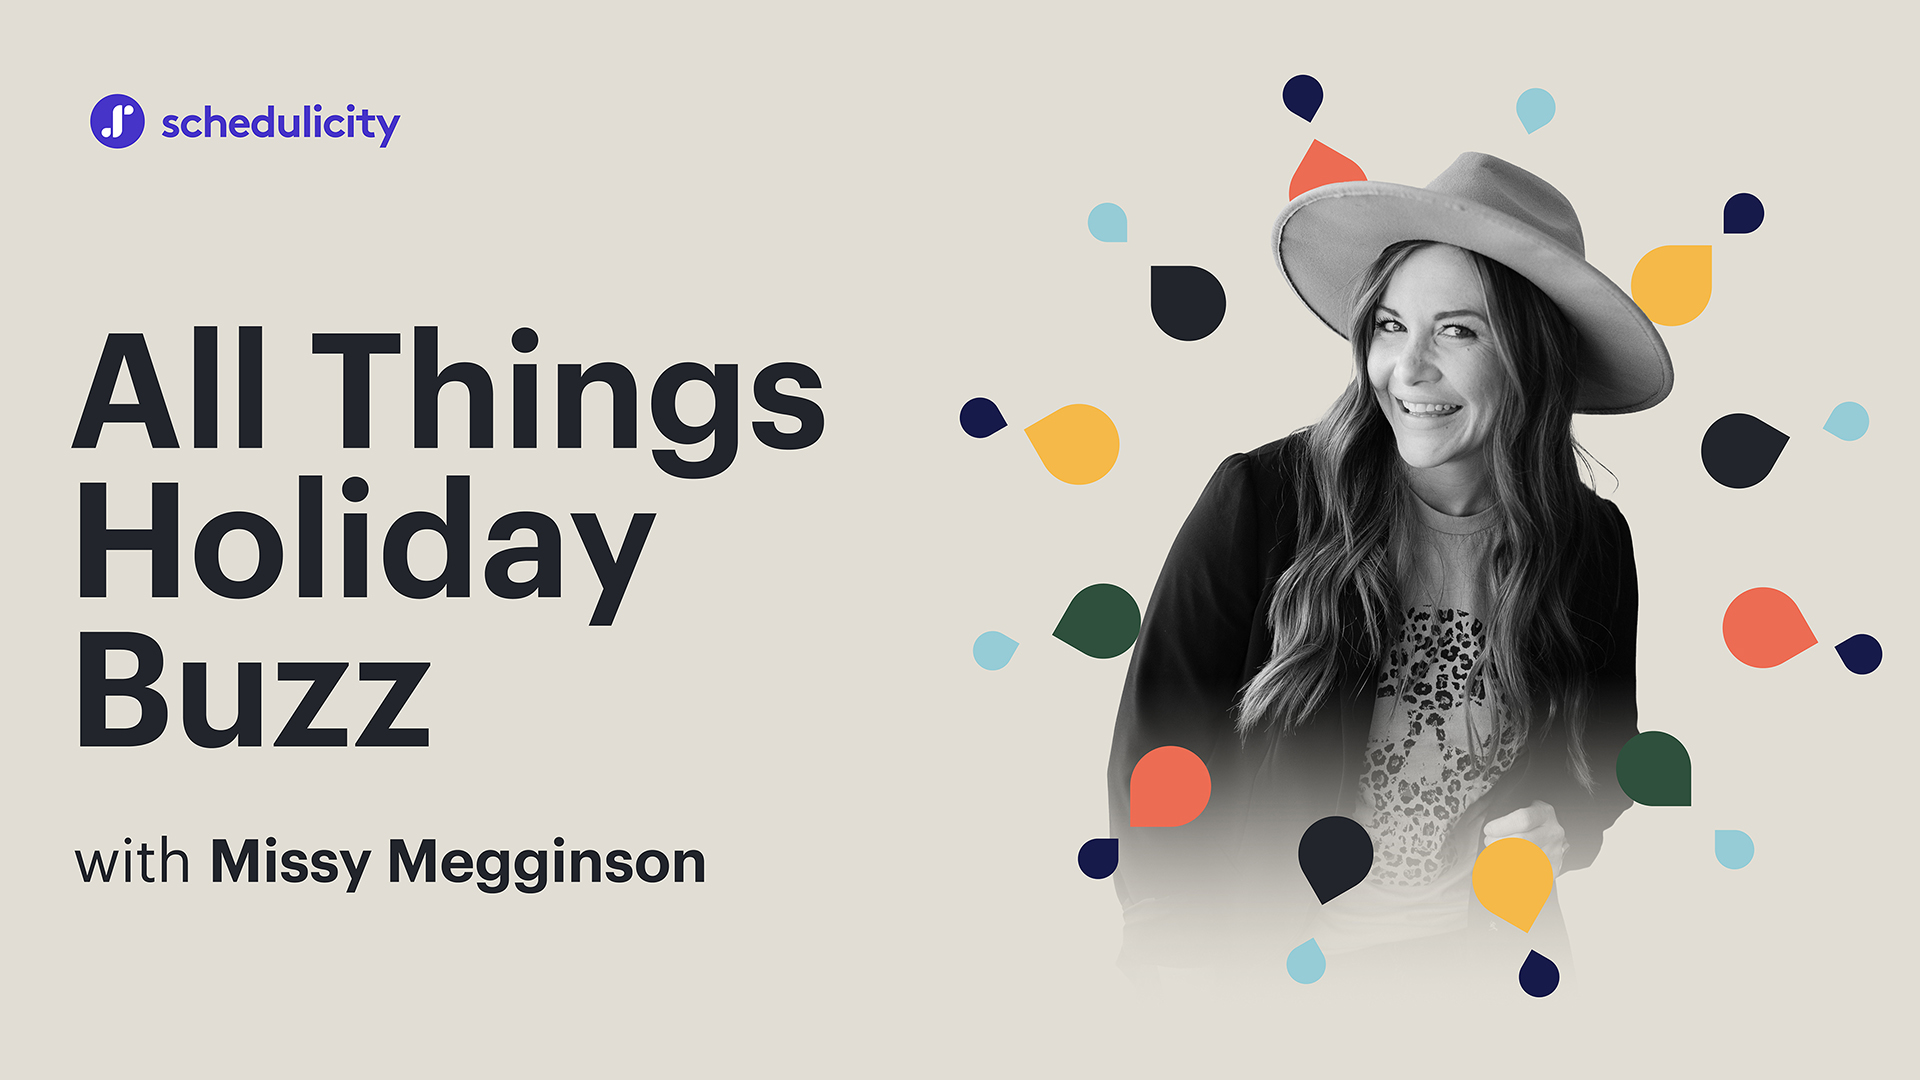 All Things Holiday Buzz with Missy Megginson